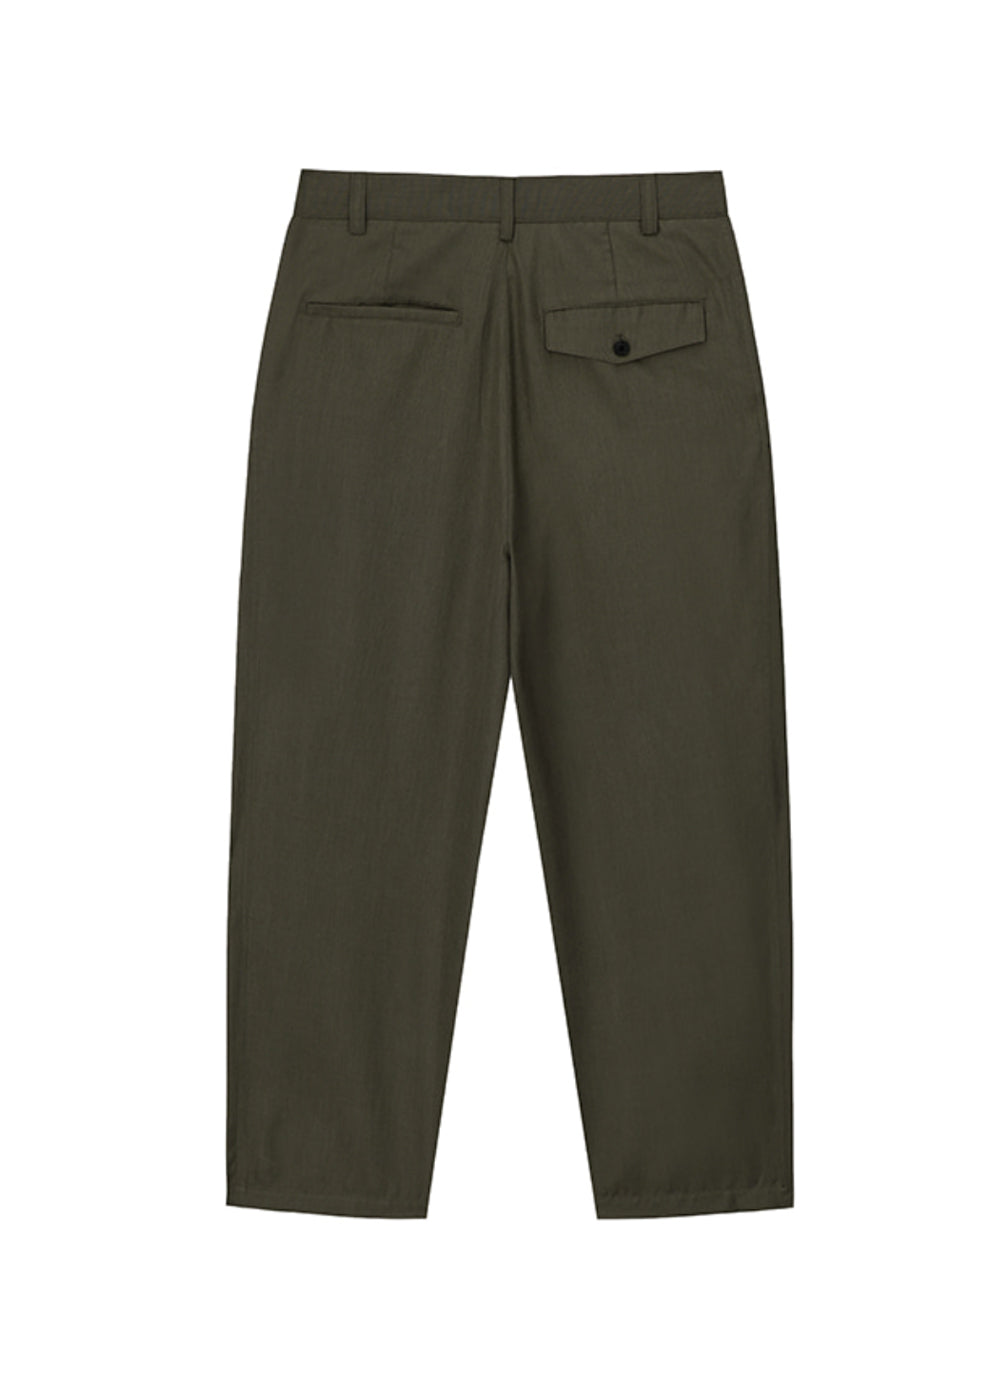 TWO TUCK WOOL PANTS_OLIVE